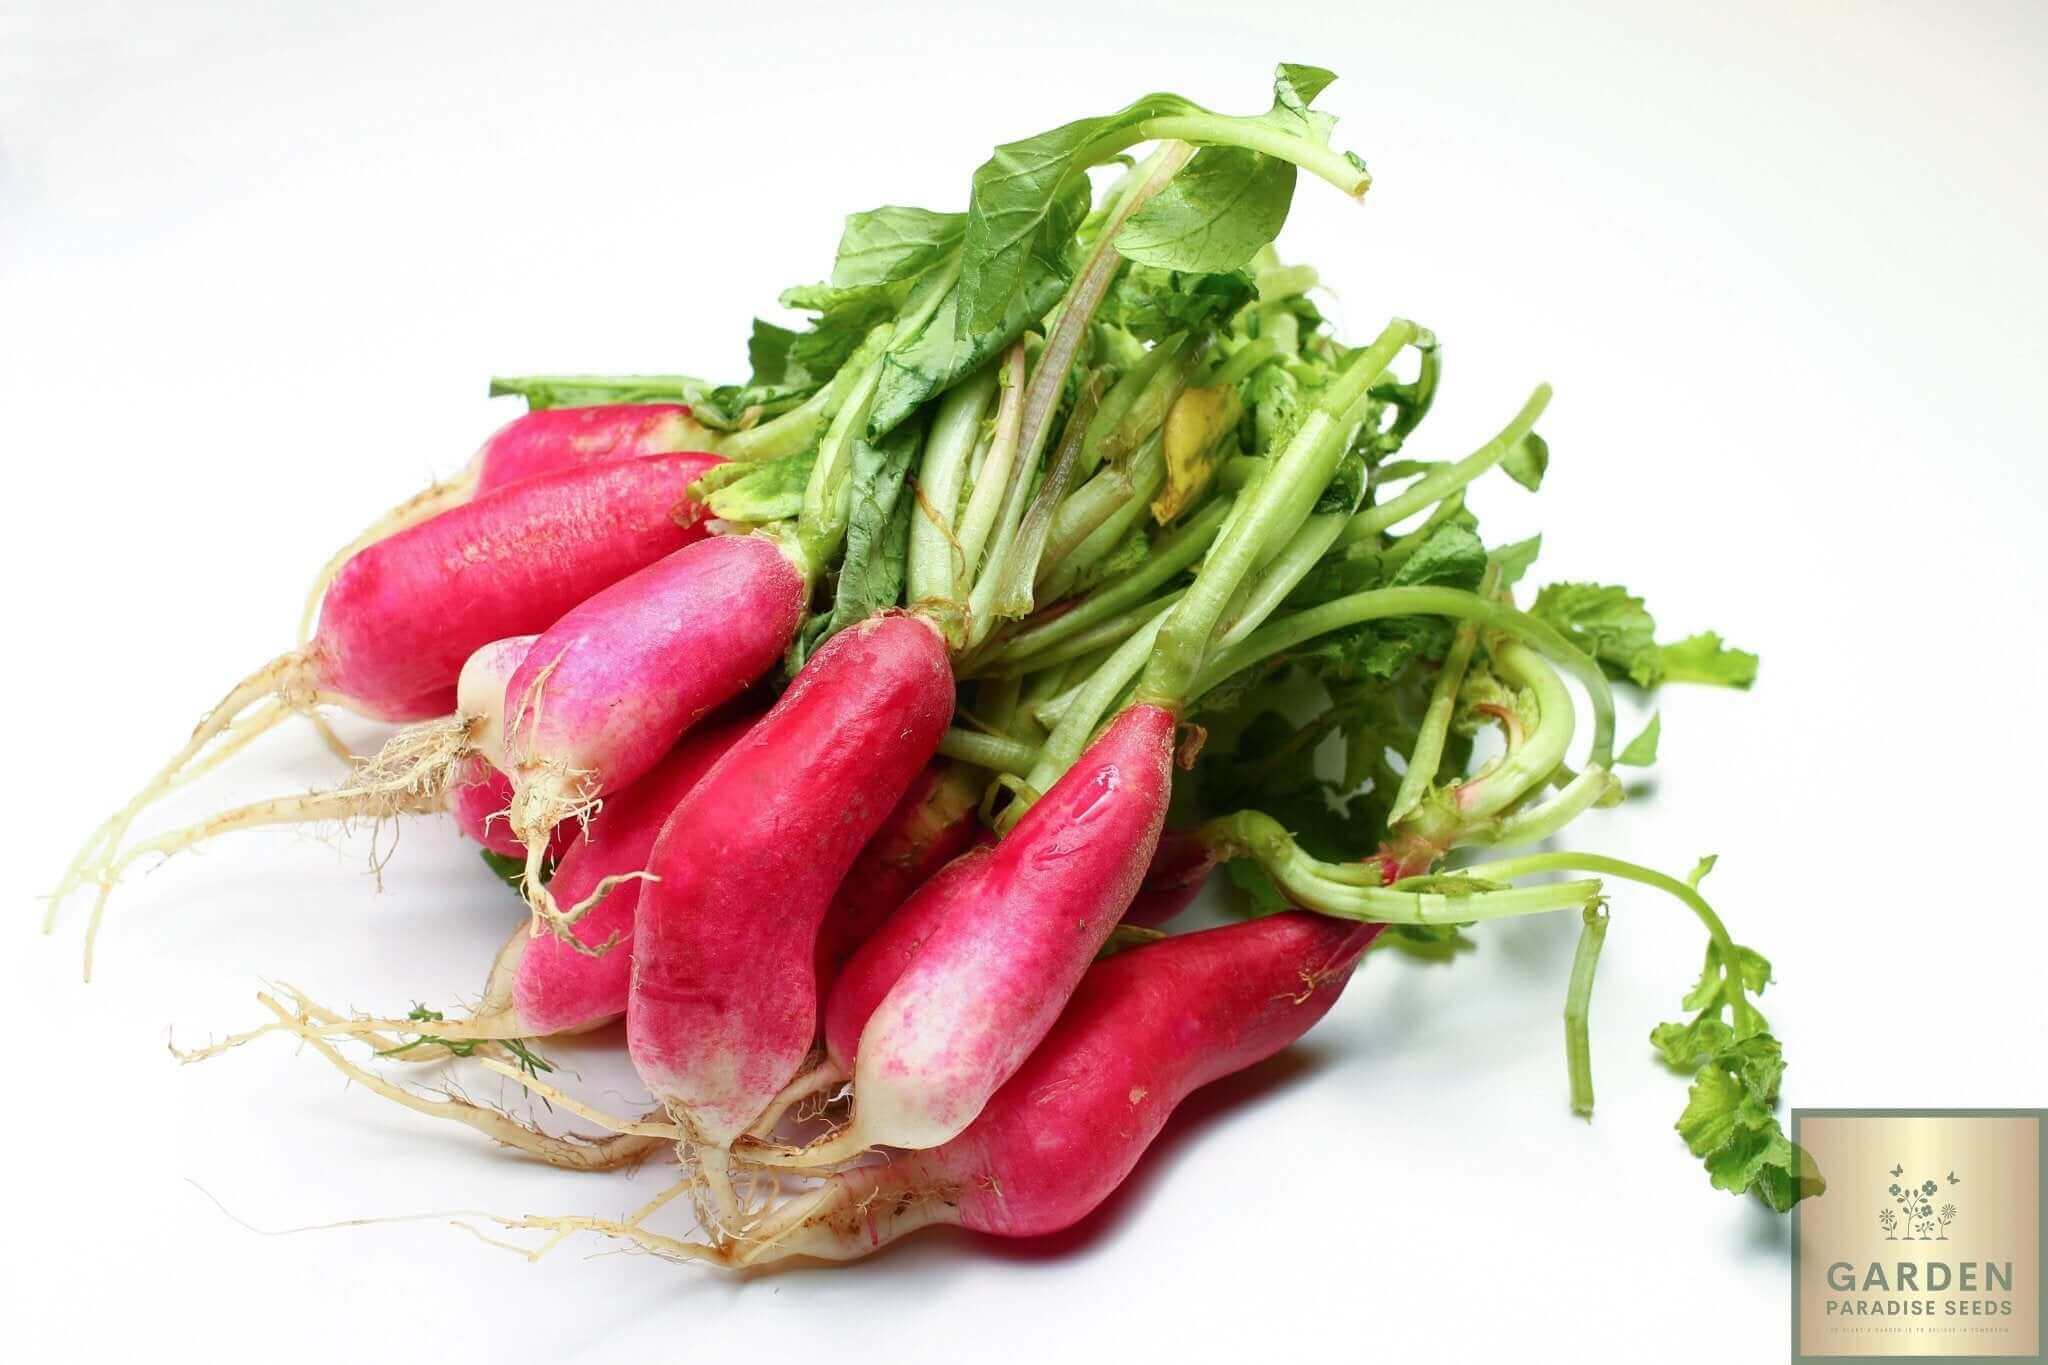 French Breakfast Radish Seeds - Grow crisp and vibrant radishes in your garden